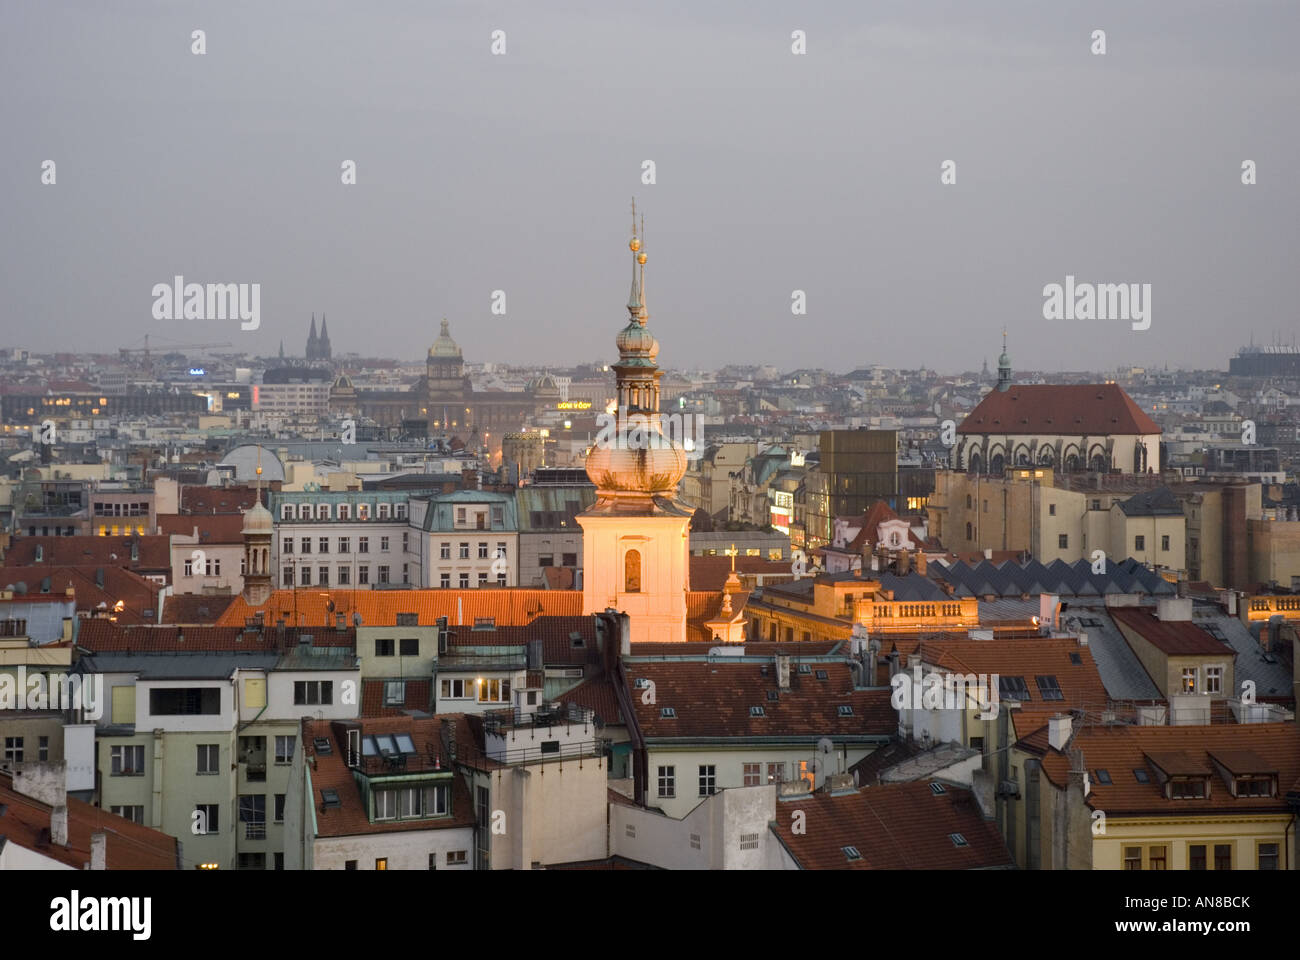 The city of Prague, as seen from the Old Town Hall look out tower, Czech Republic. Stock Photo